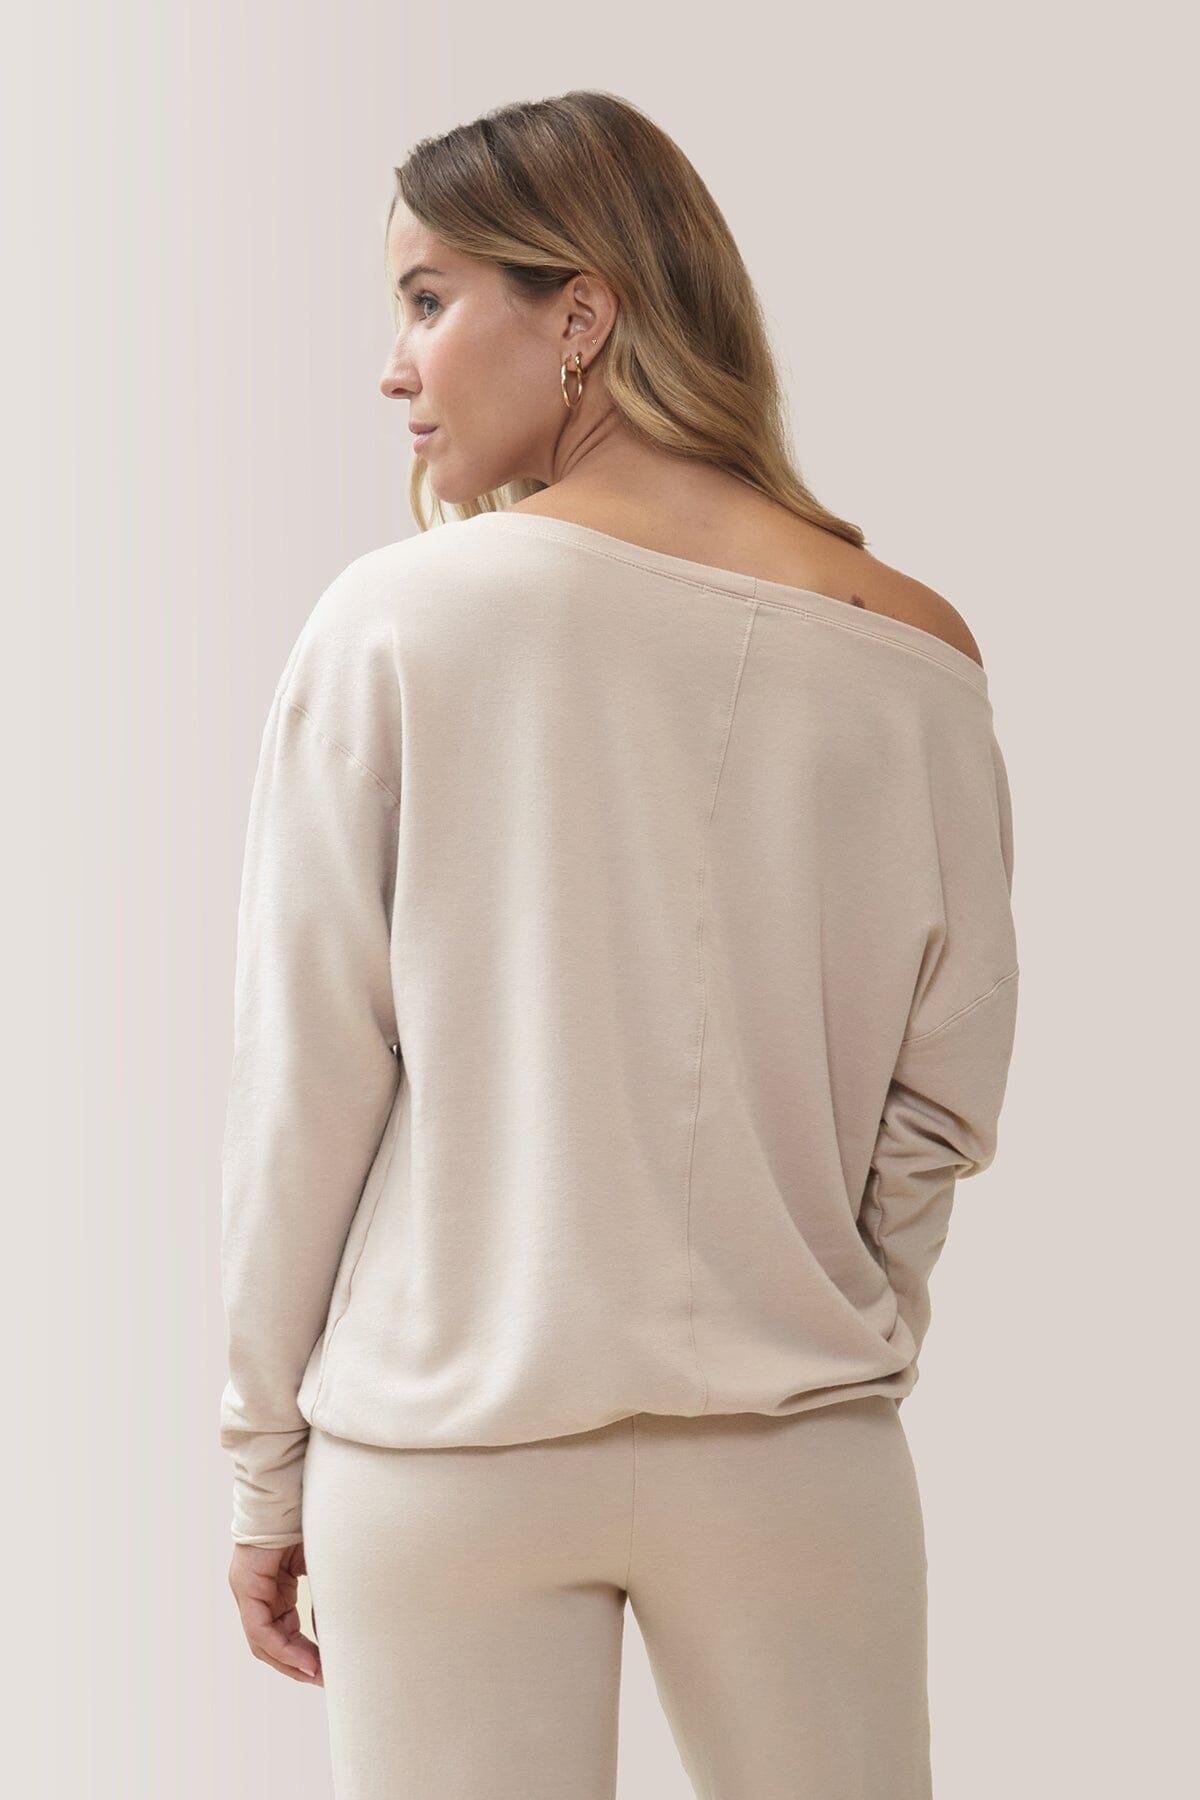 Femme qui porte le chandail Flashdance de Rose Boreal./ Women wearing the Flashdance pullover from Rose Boreal. - Sand Beige